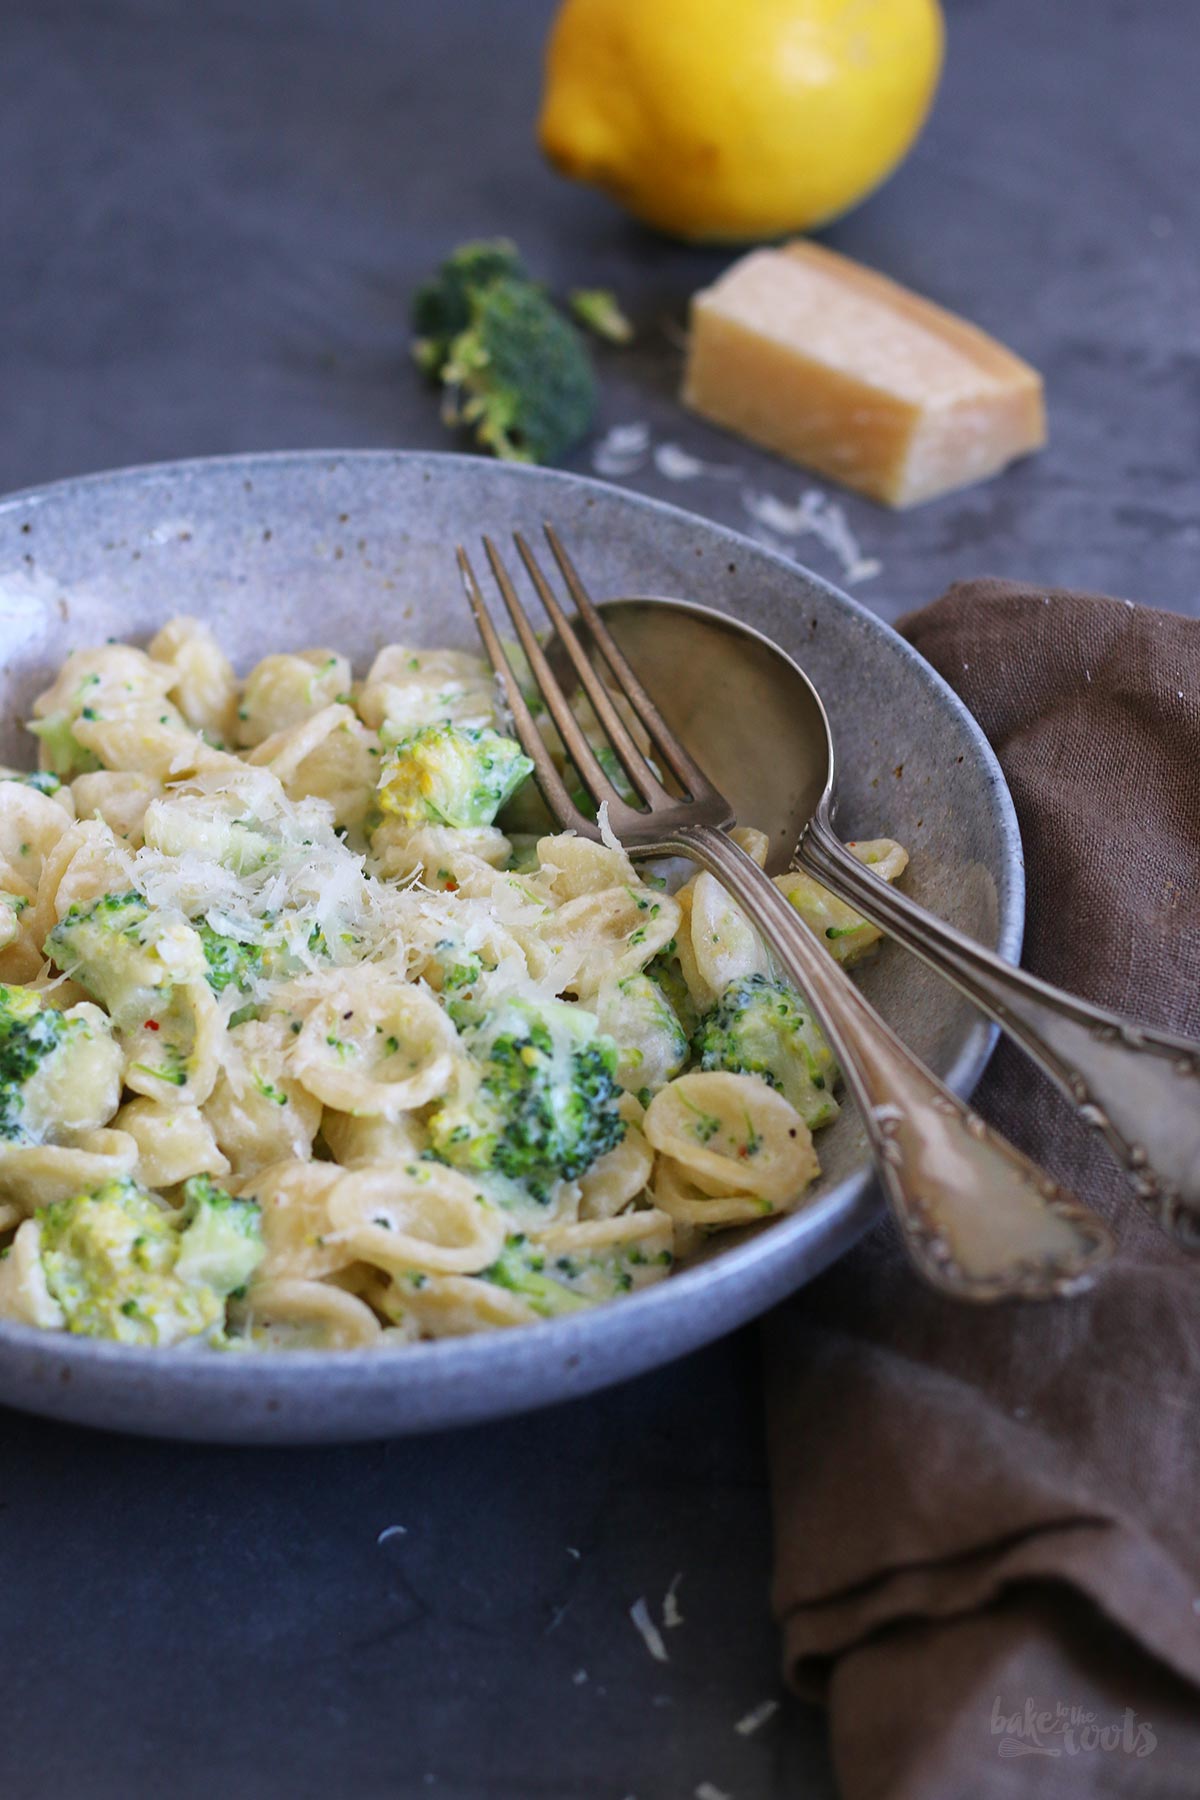 One-Pot Pasta with Creamy Ricotta Lemon Sauce and Broccoli | Bake to the roots